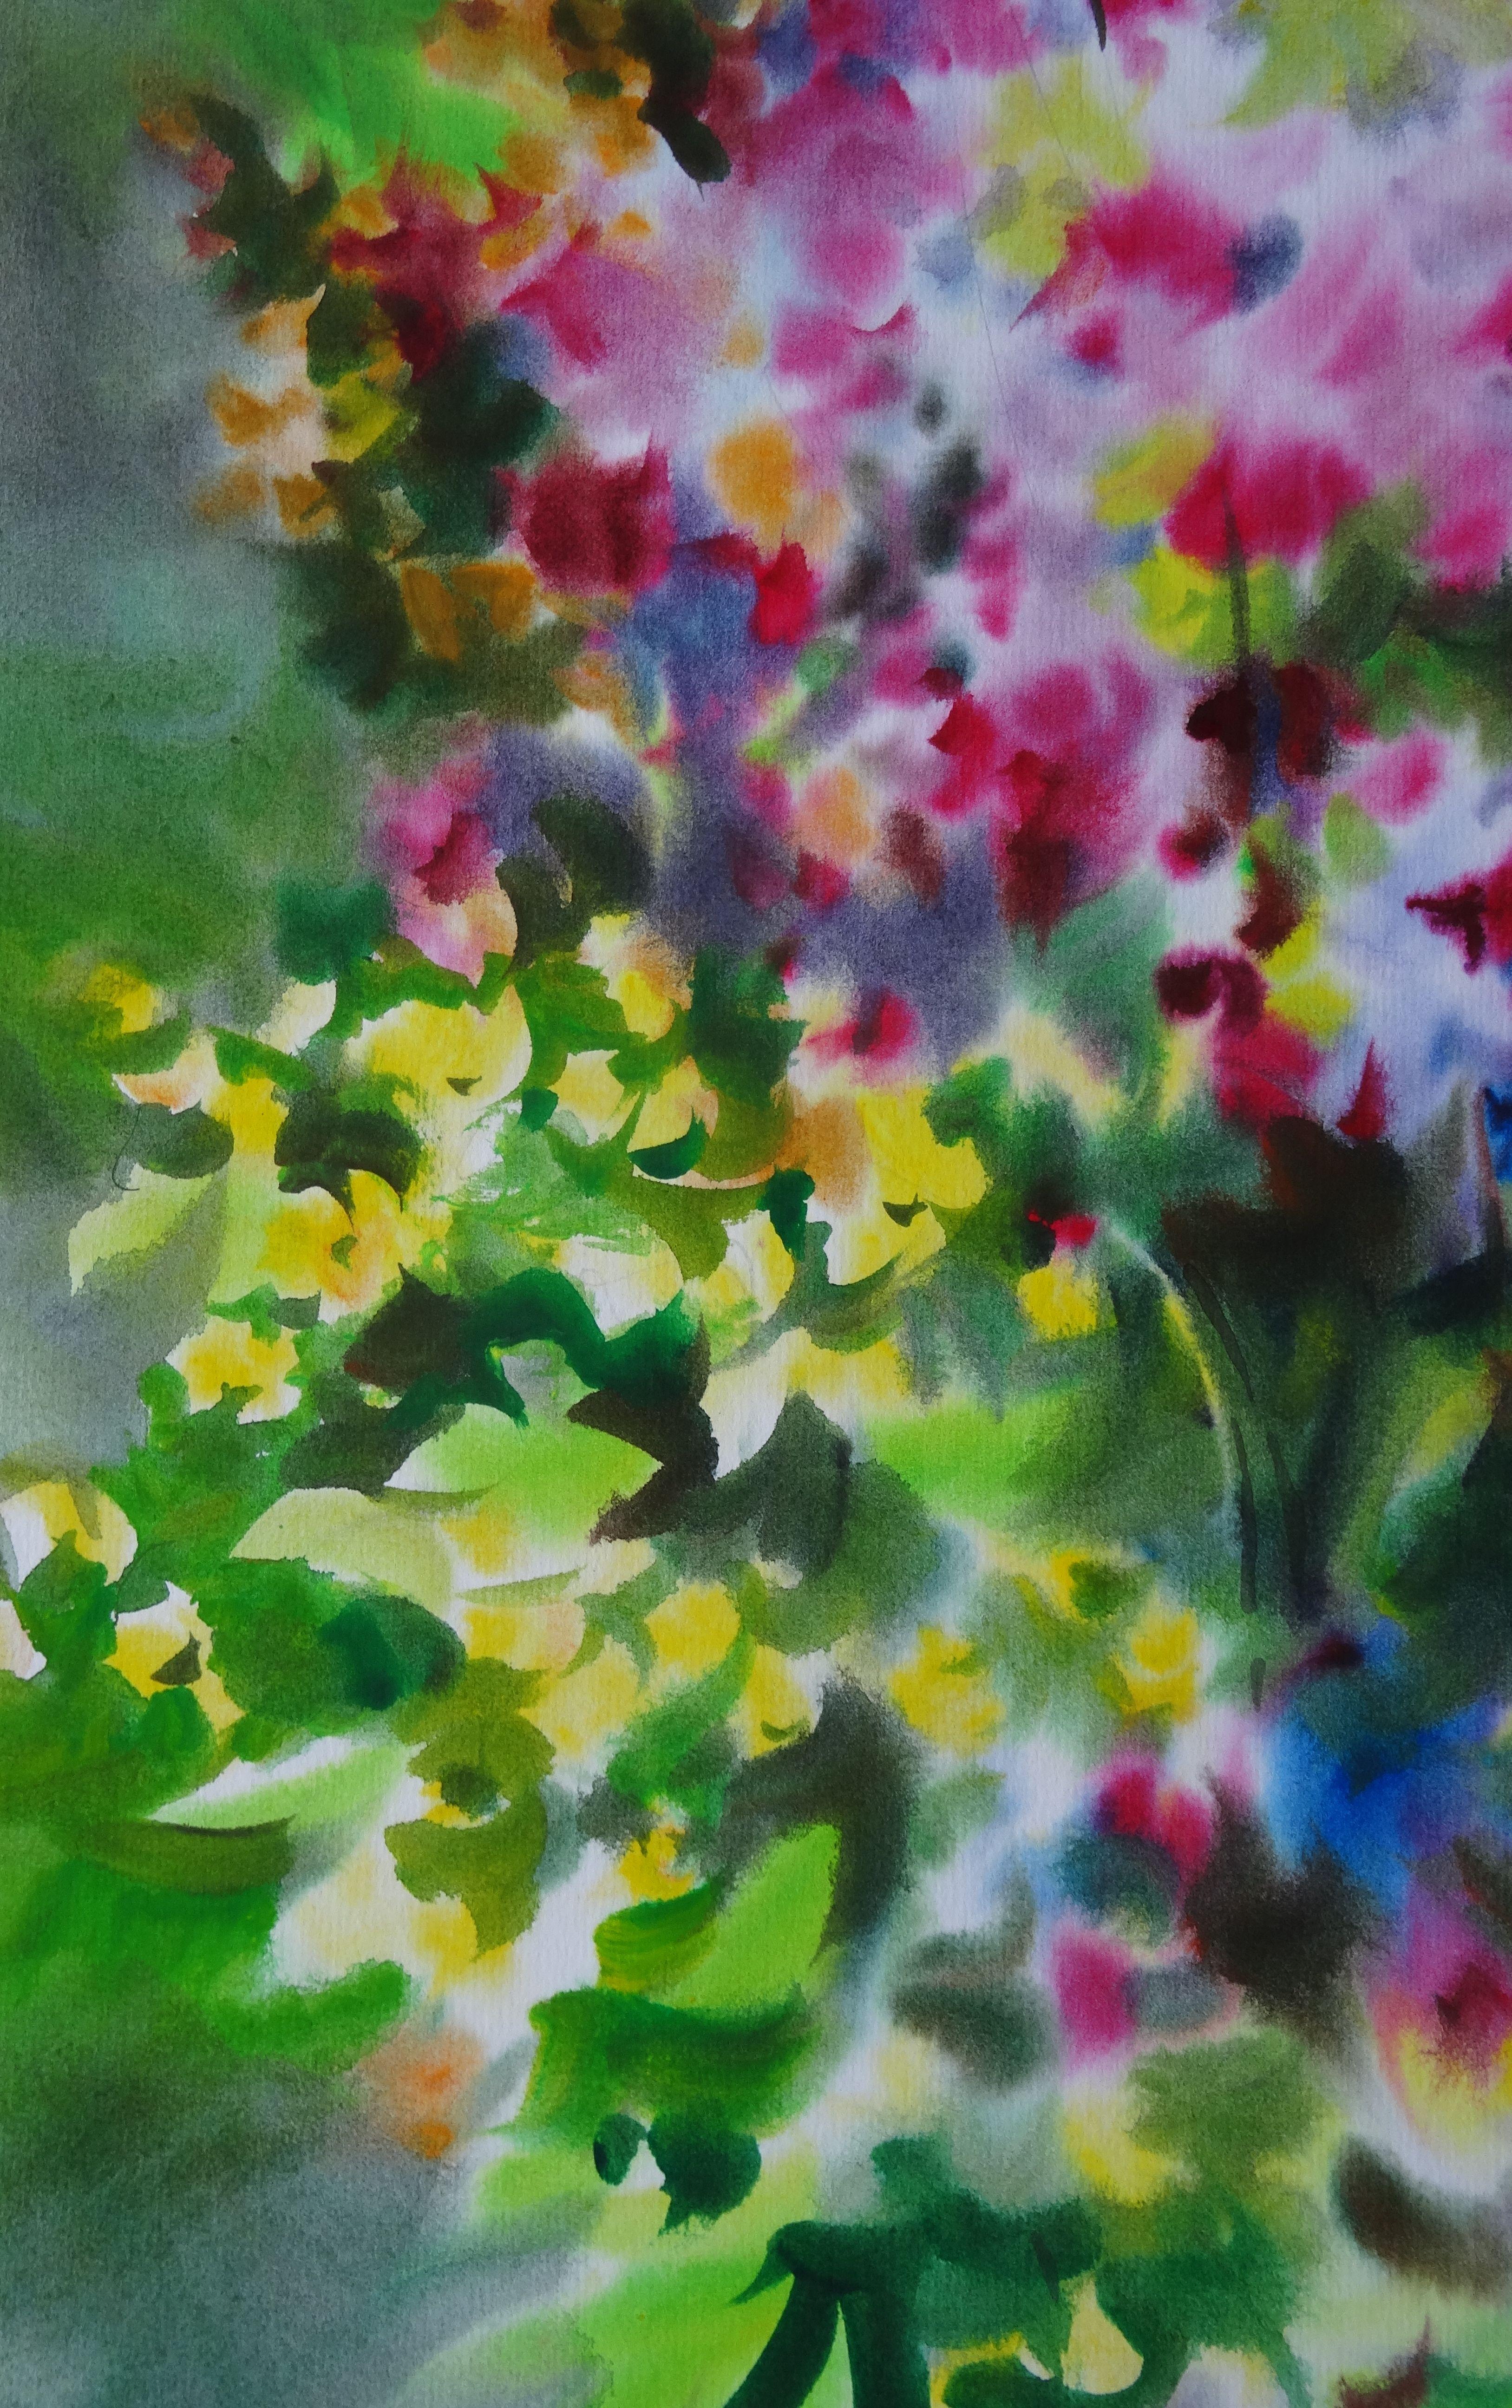 Bright summer flowers. 2020. Watercolor, paper, 74 x 59 cm

Zigmunds Šņore was born in 1942 in Latvia.  His works has been exhibited since 1969 and are held in private collections in Latvia, USA, Sweden, Australia and Germany. He is a member of the